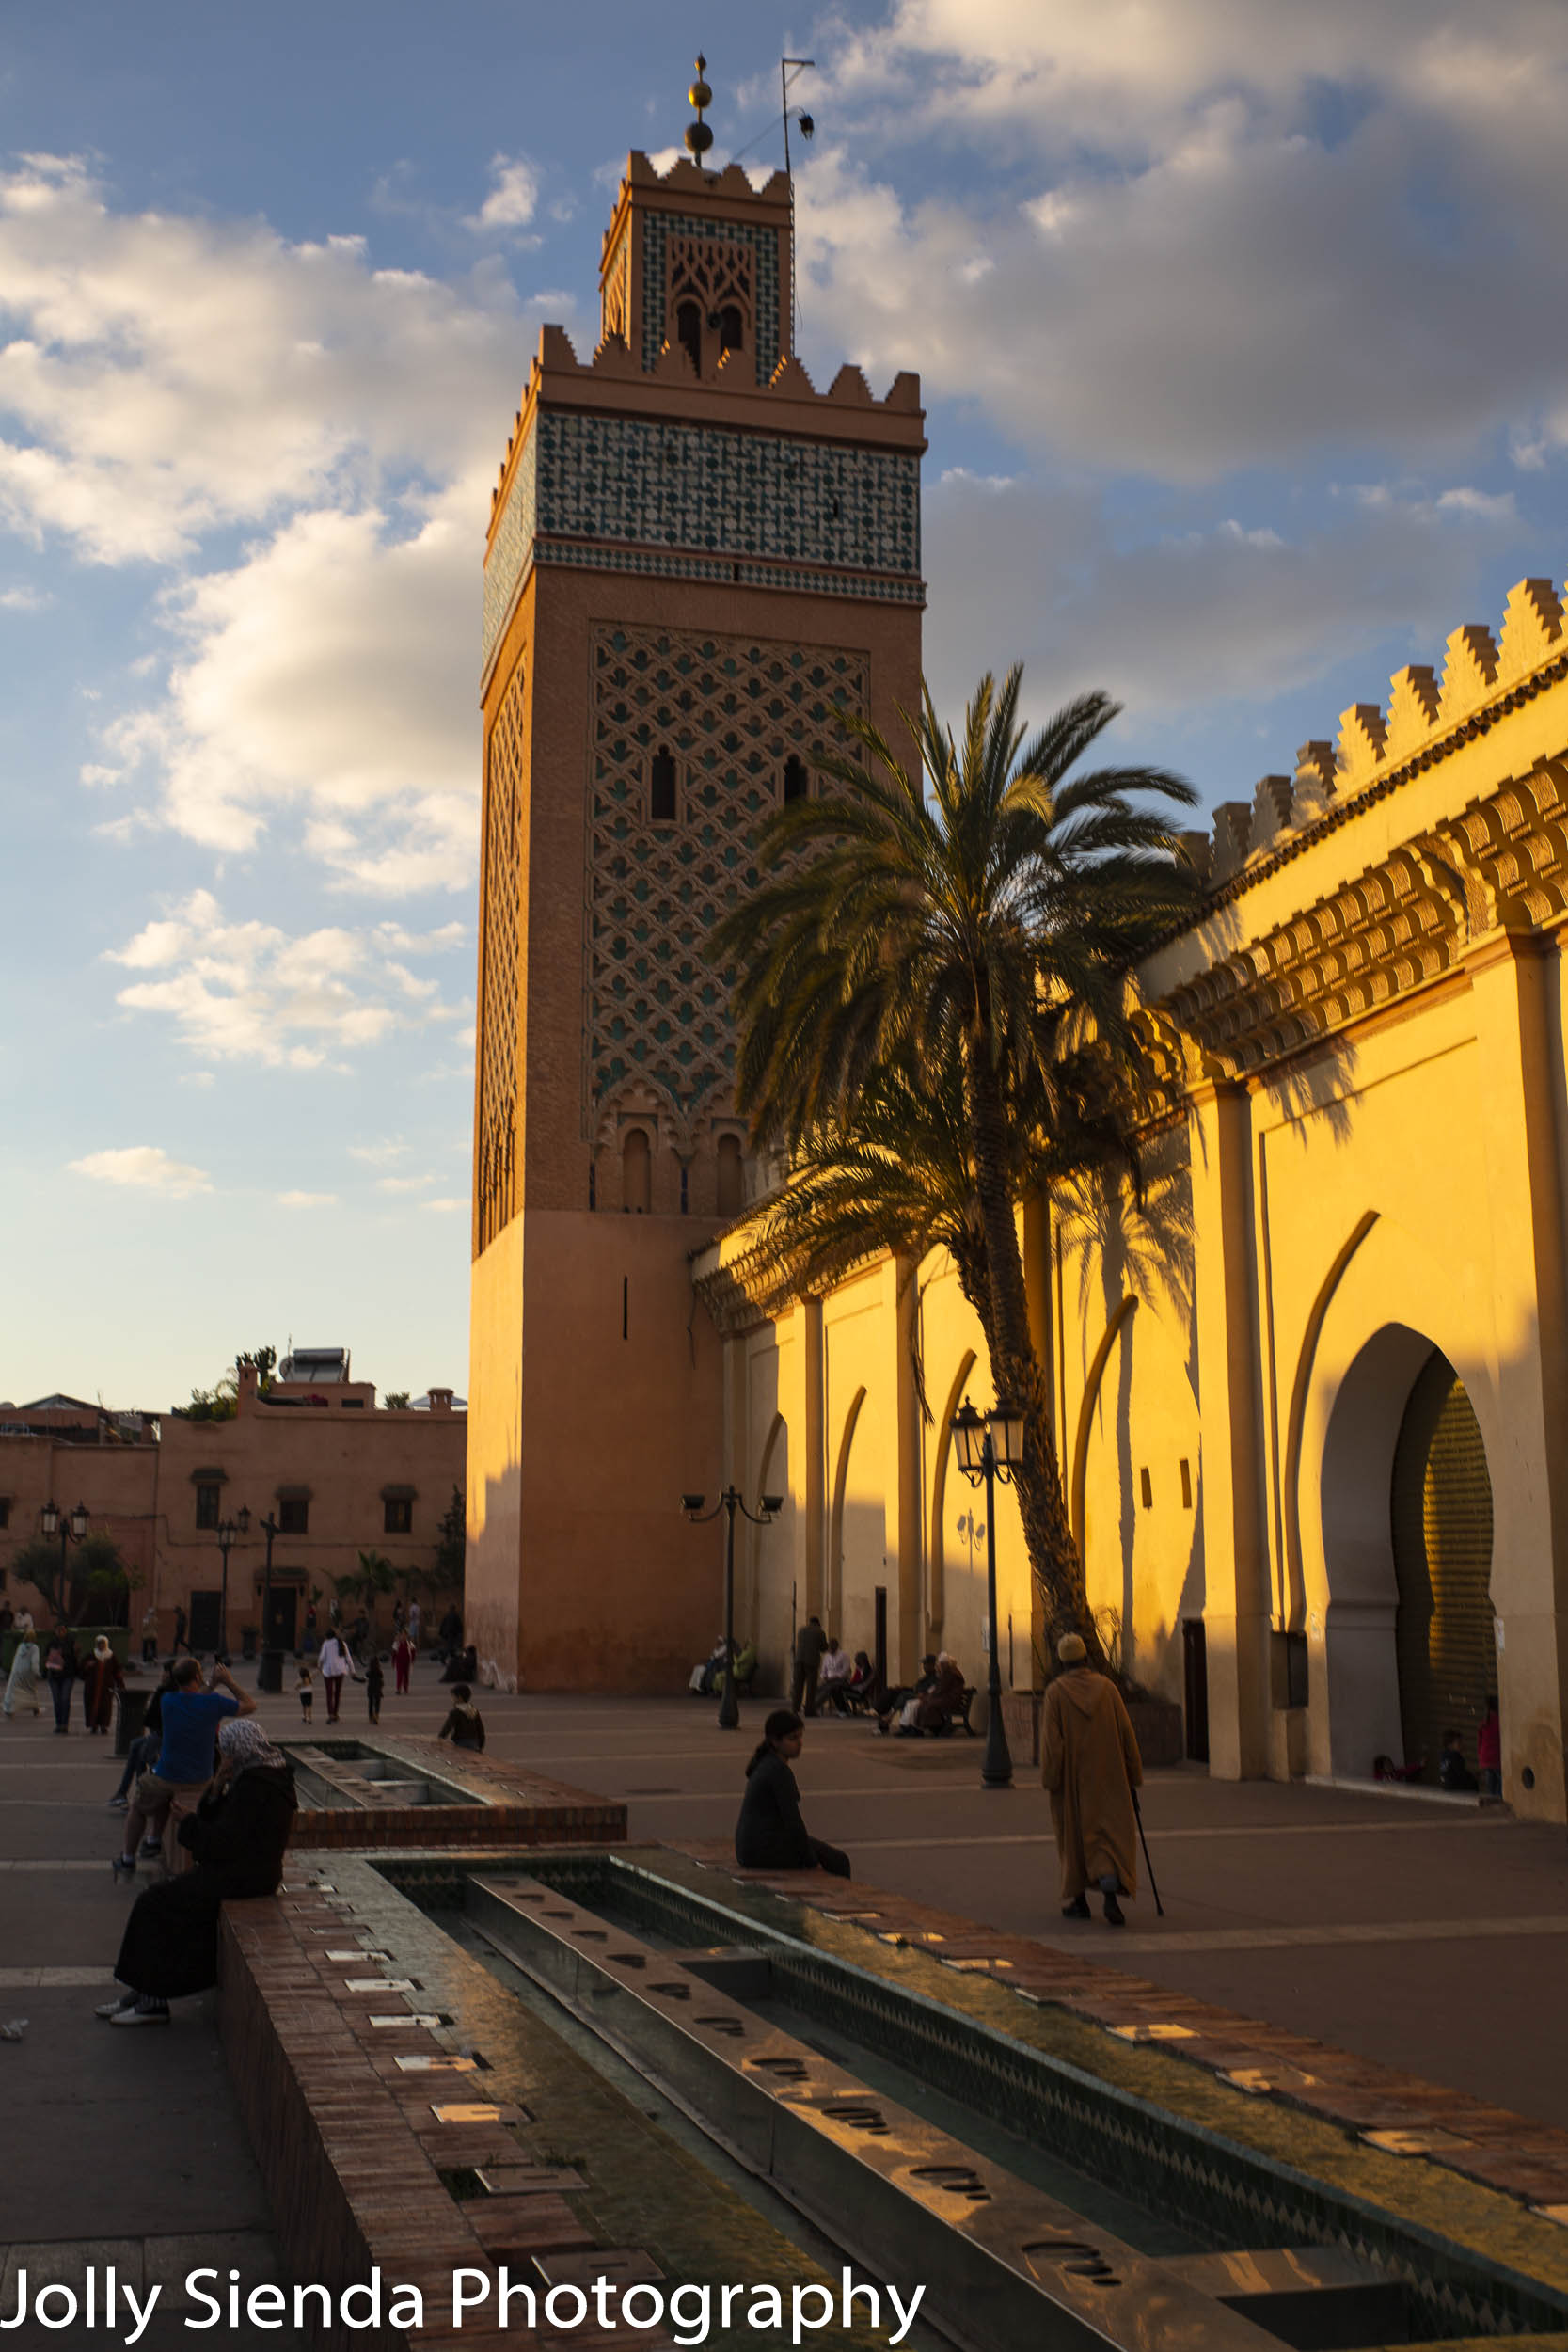 Sun sets on the Moulay El yazid Mosque